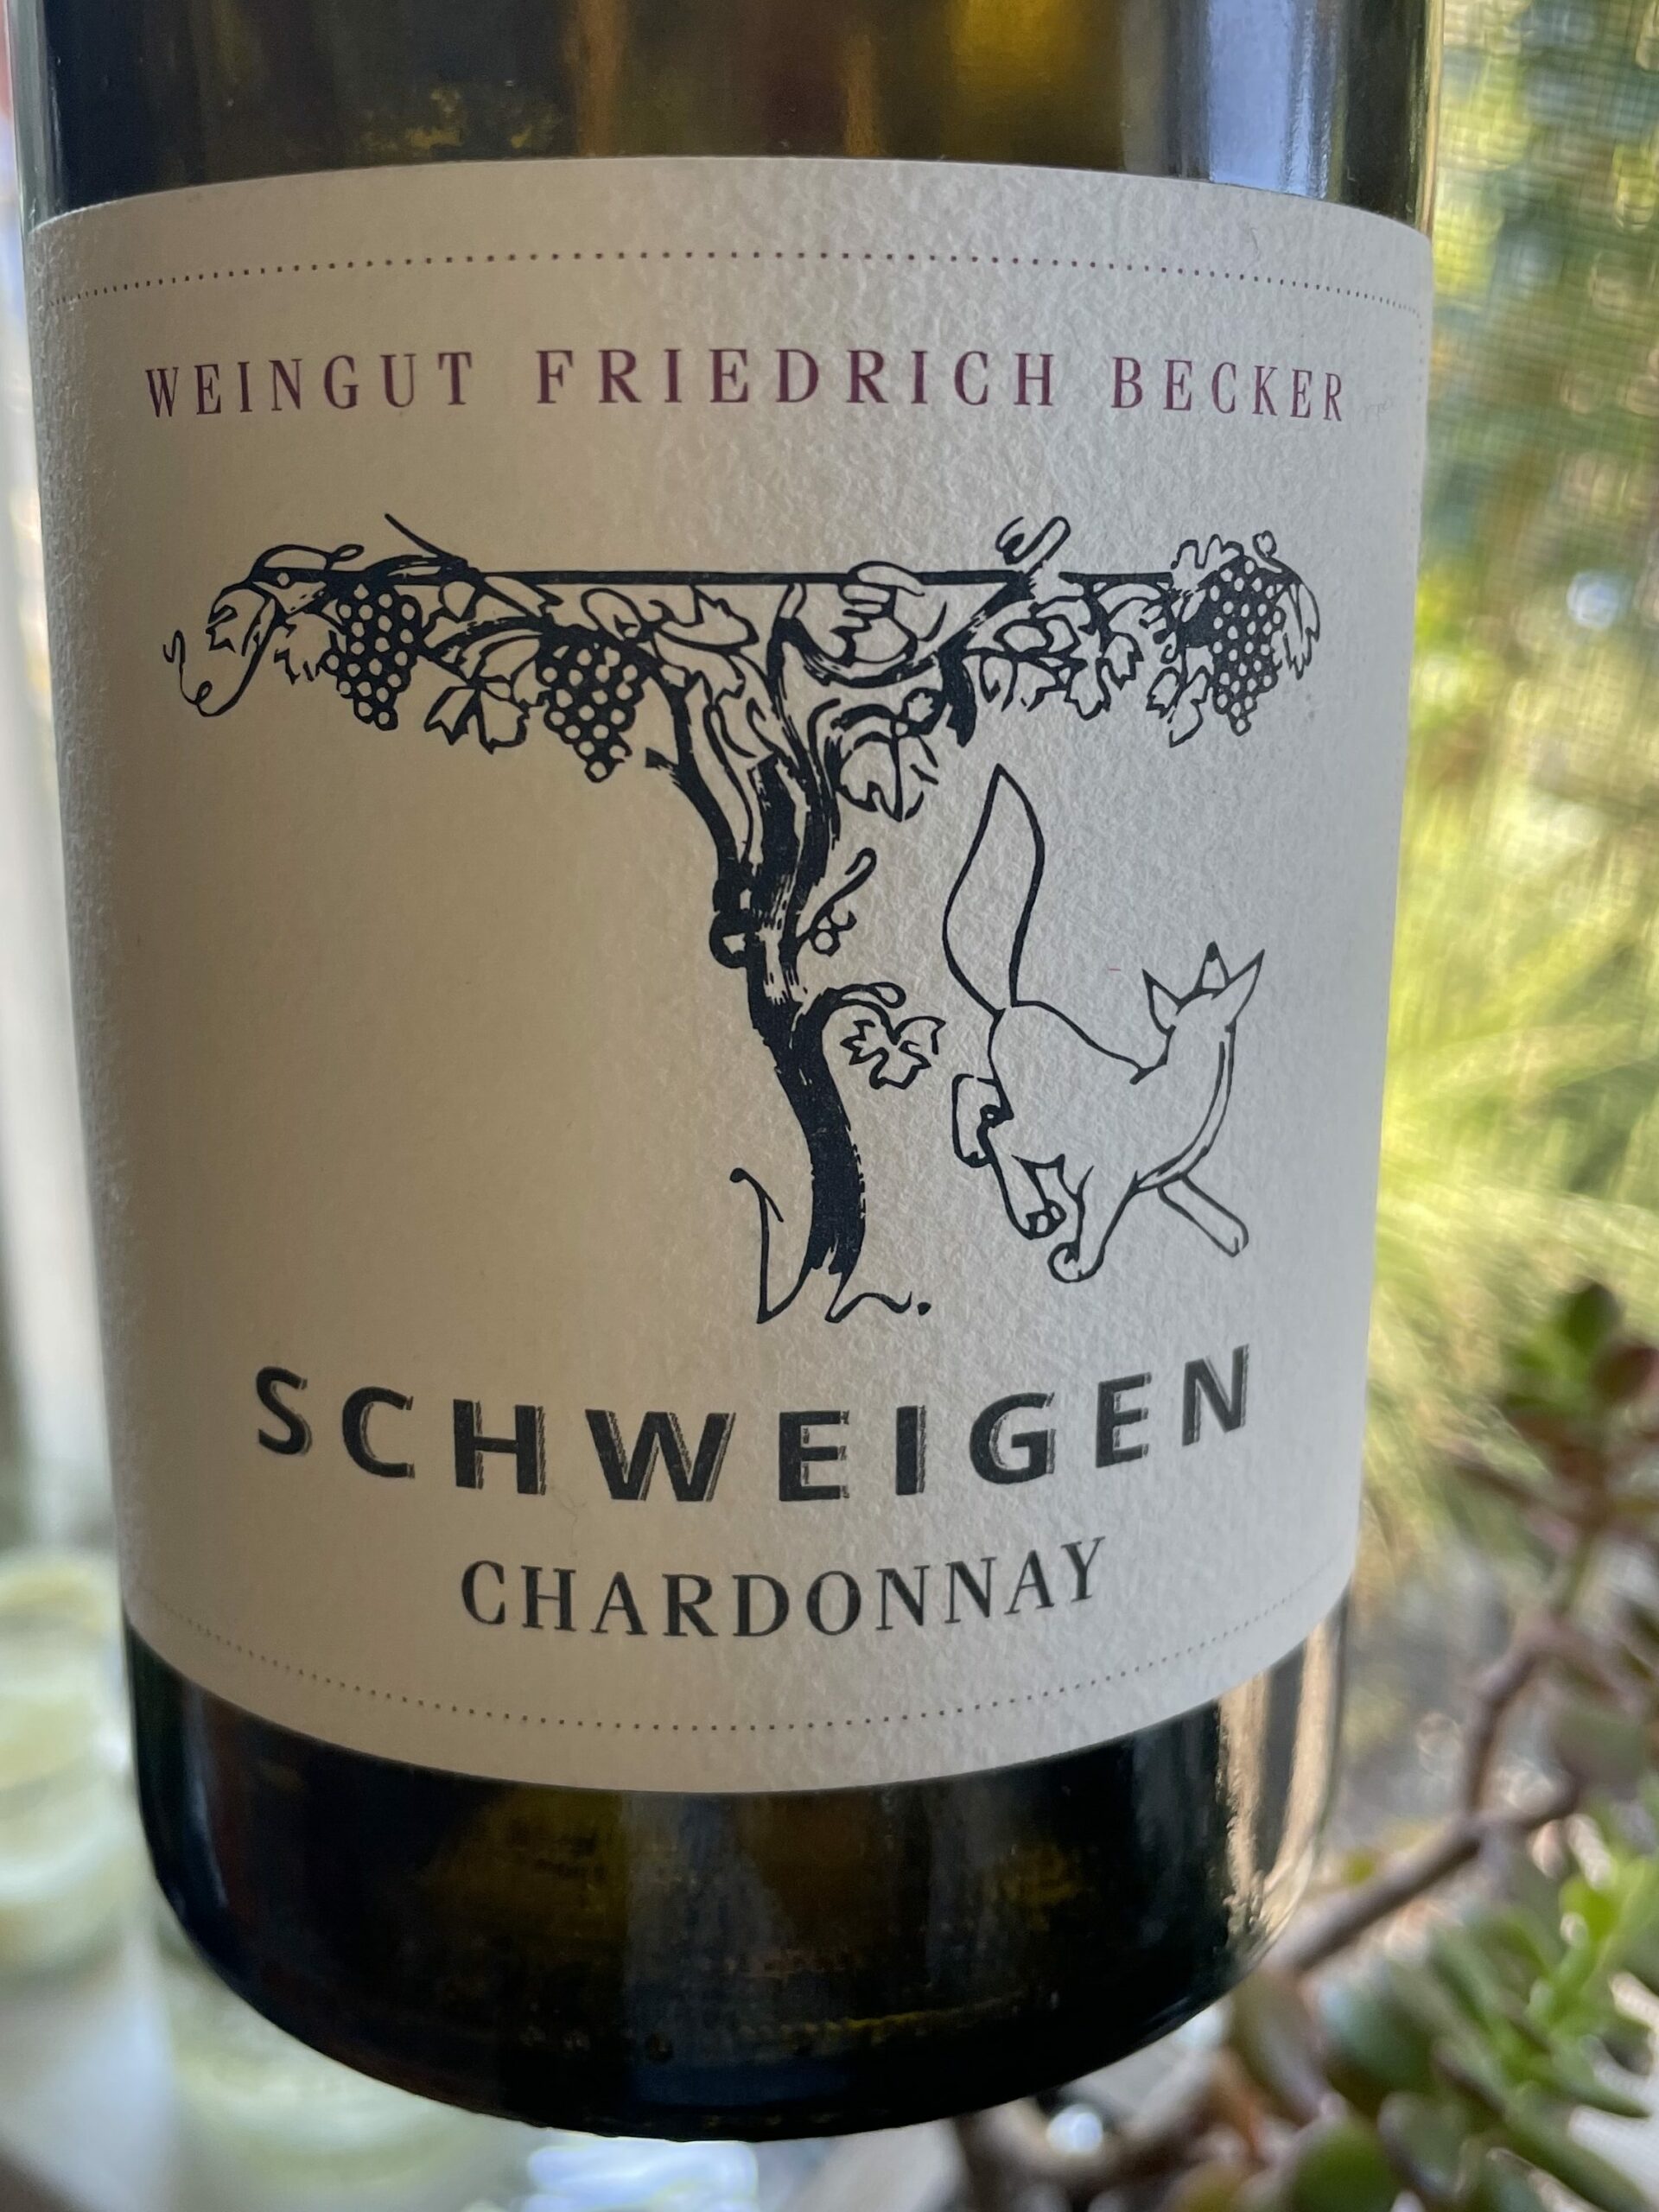 Wine botle in foreground with white label and black lettering featuring logo and SCHWEIGEN.